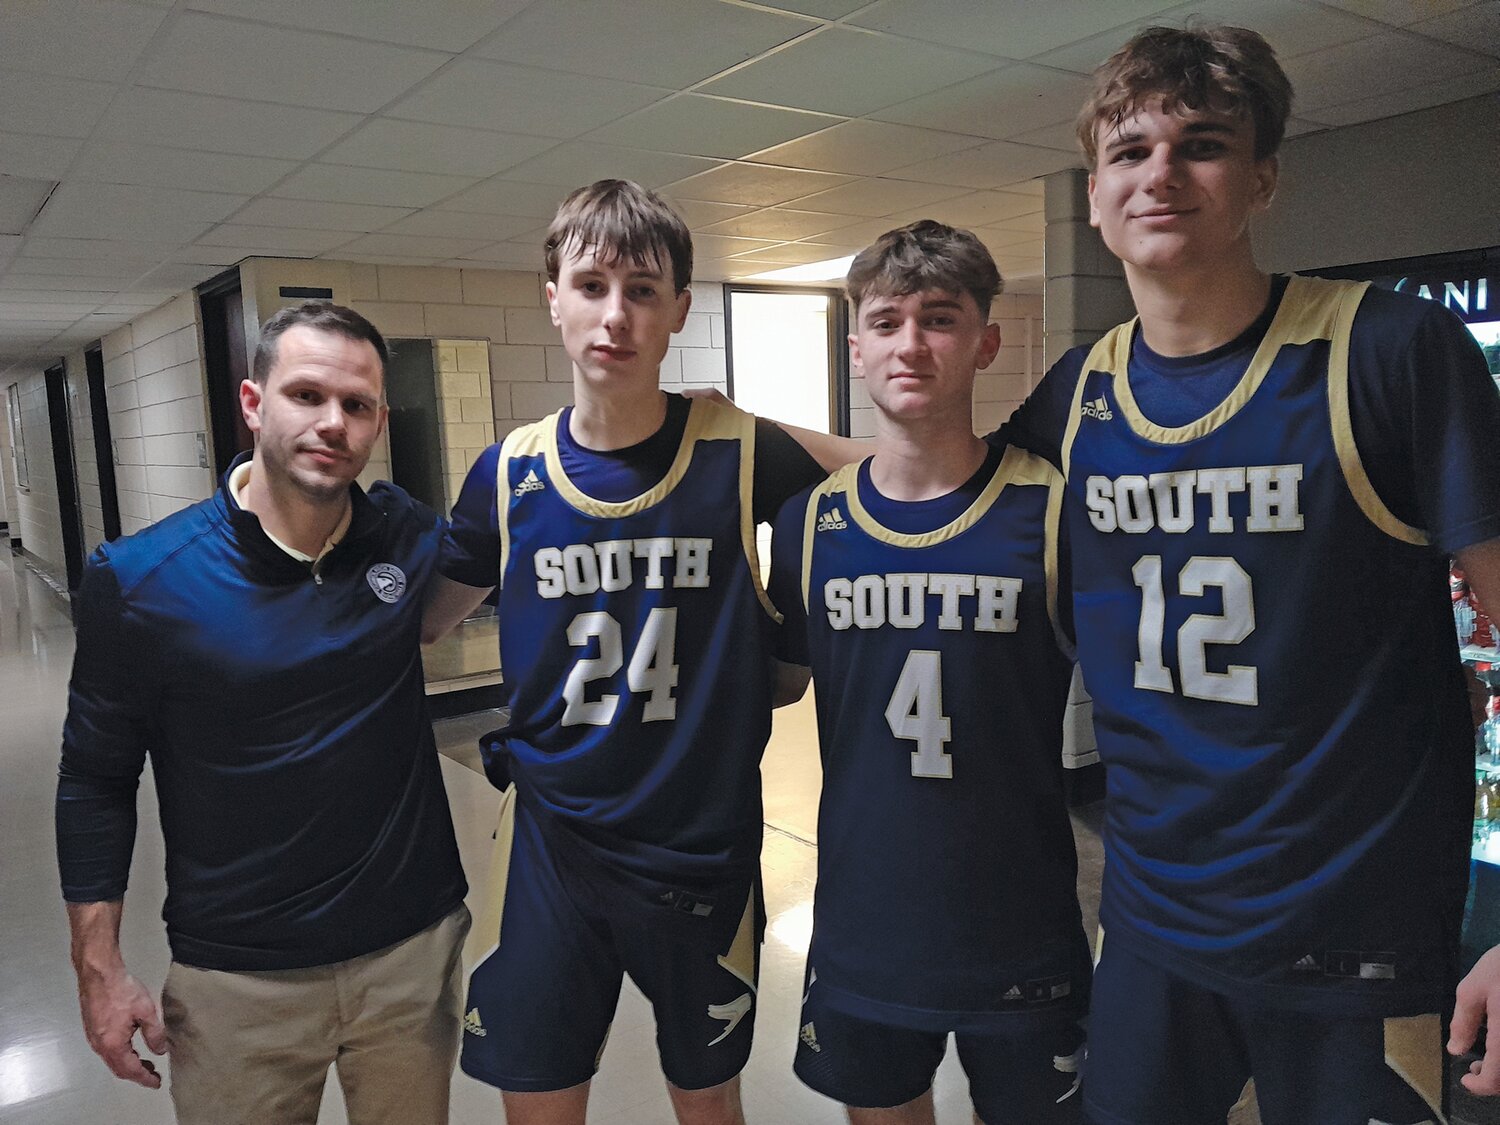 From left are: CR South boys basketball coach Andrew Rogers and players Ryan Wekluk, Mike Burns and Gabe Cerulli